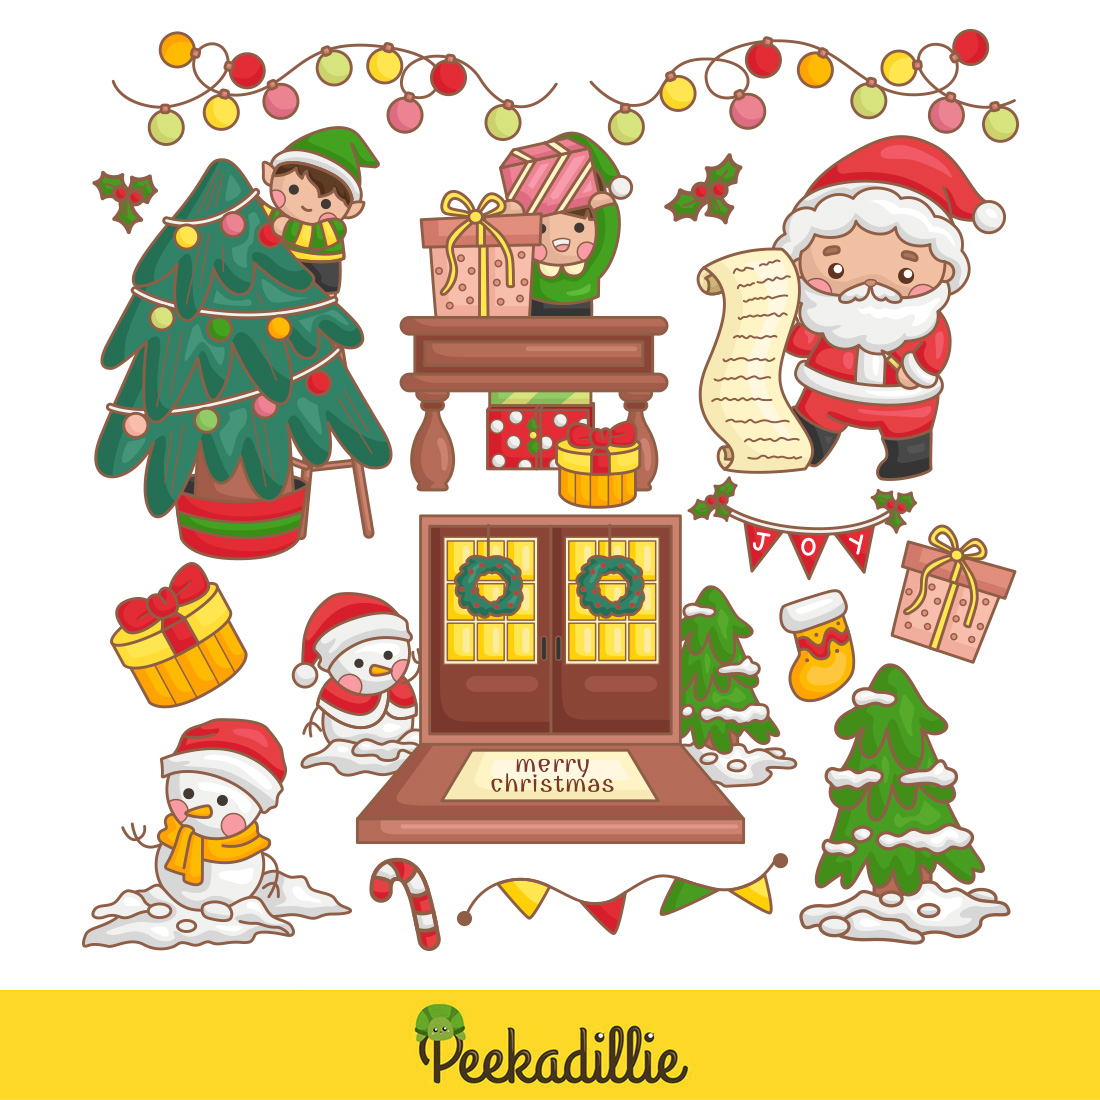 Decorated for Christmas Character Snowman Santa Claus Elf Holiday Decoration Background Cartoon Illustration Vector Clipart Sticker preview image.